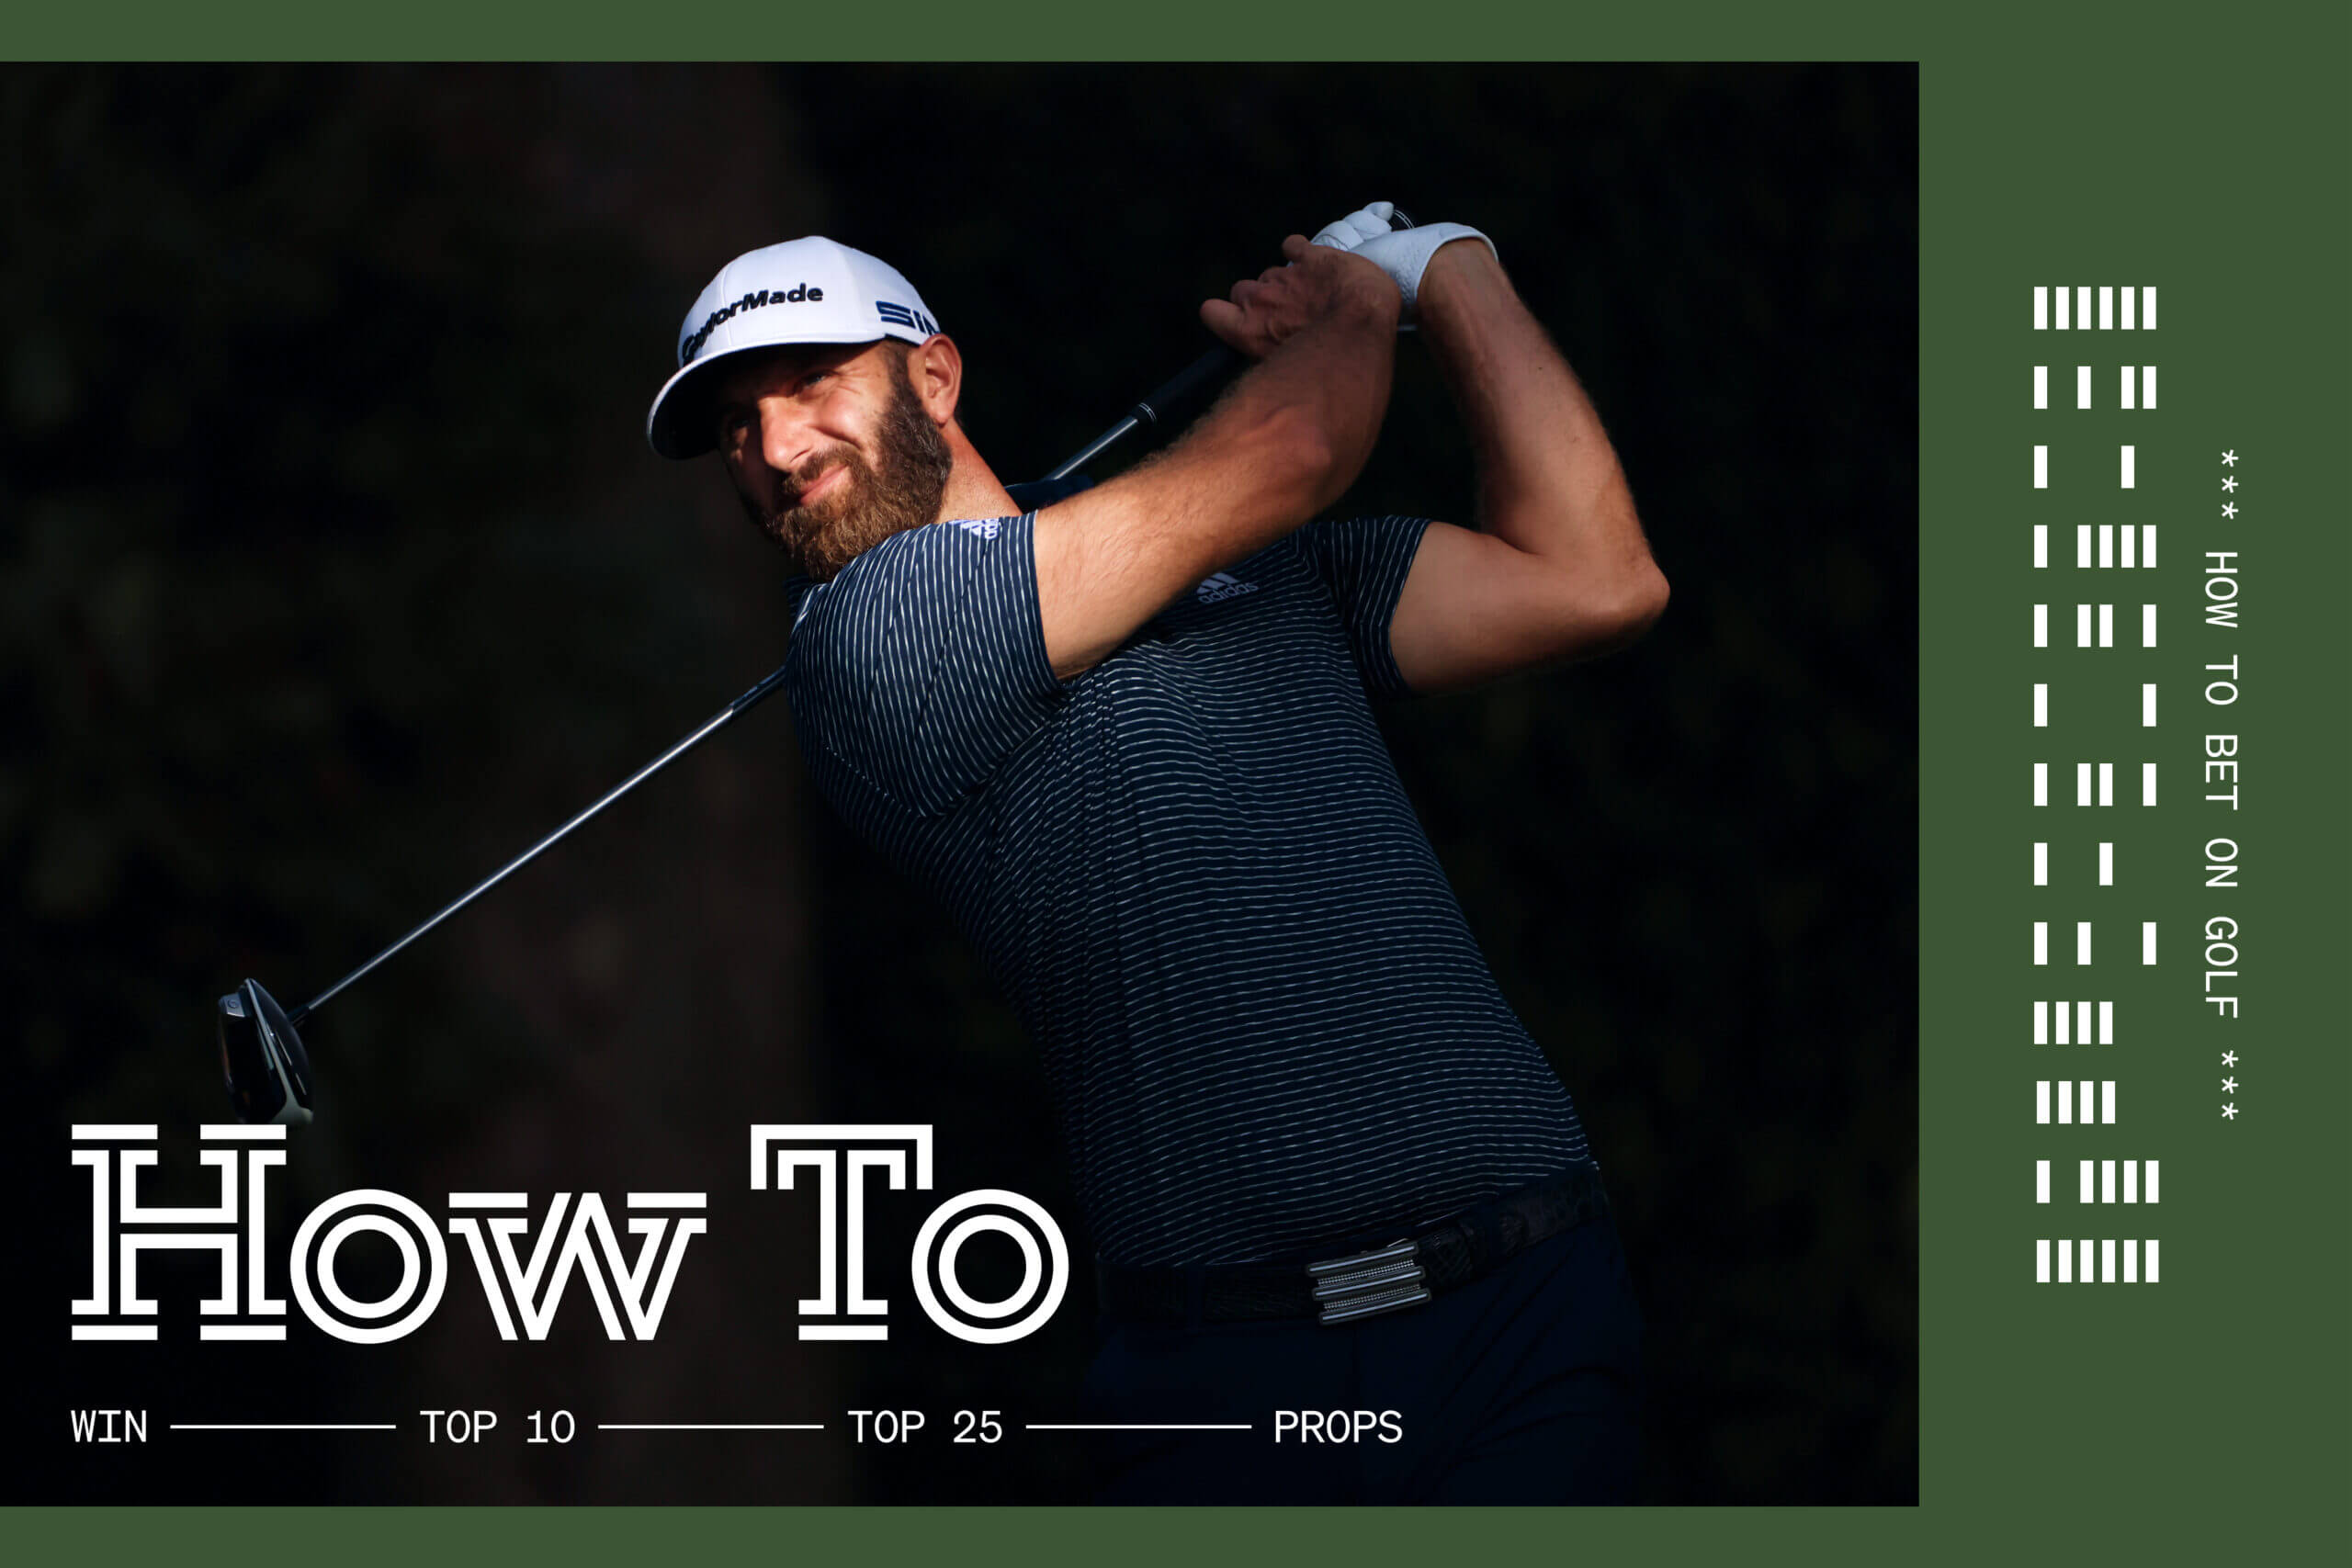 Photo: how to place bet on golf